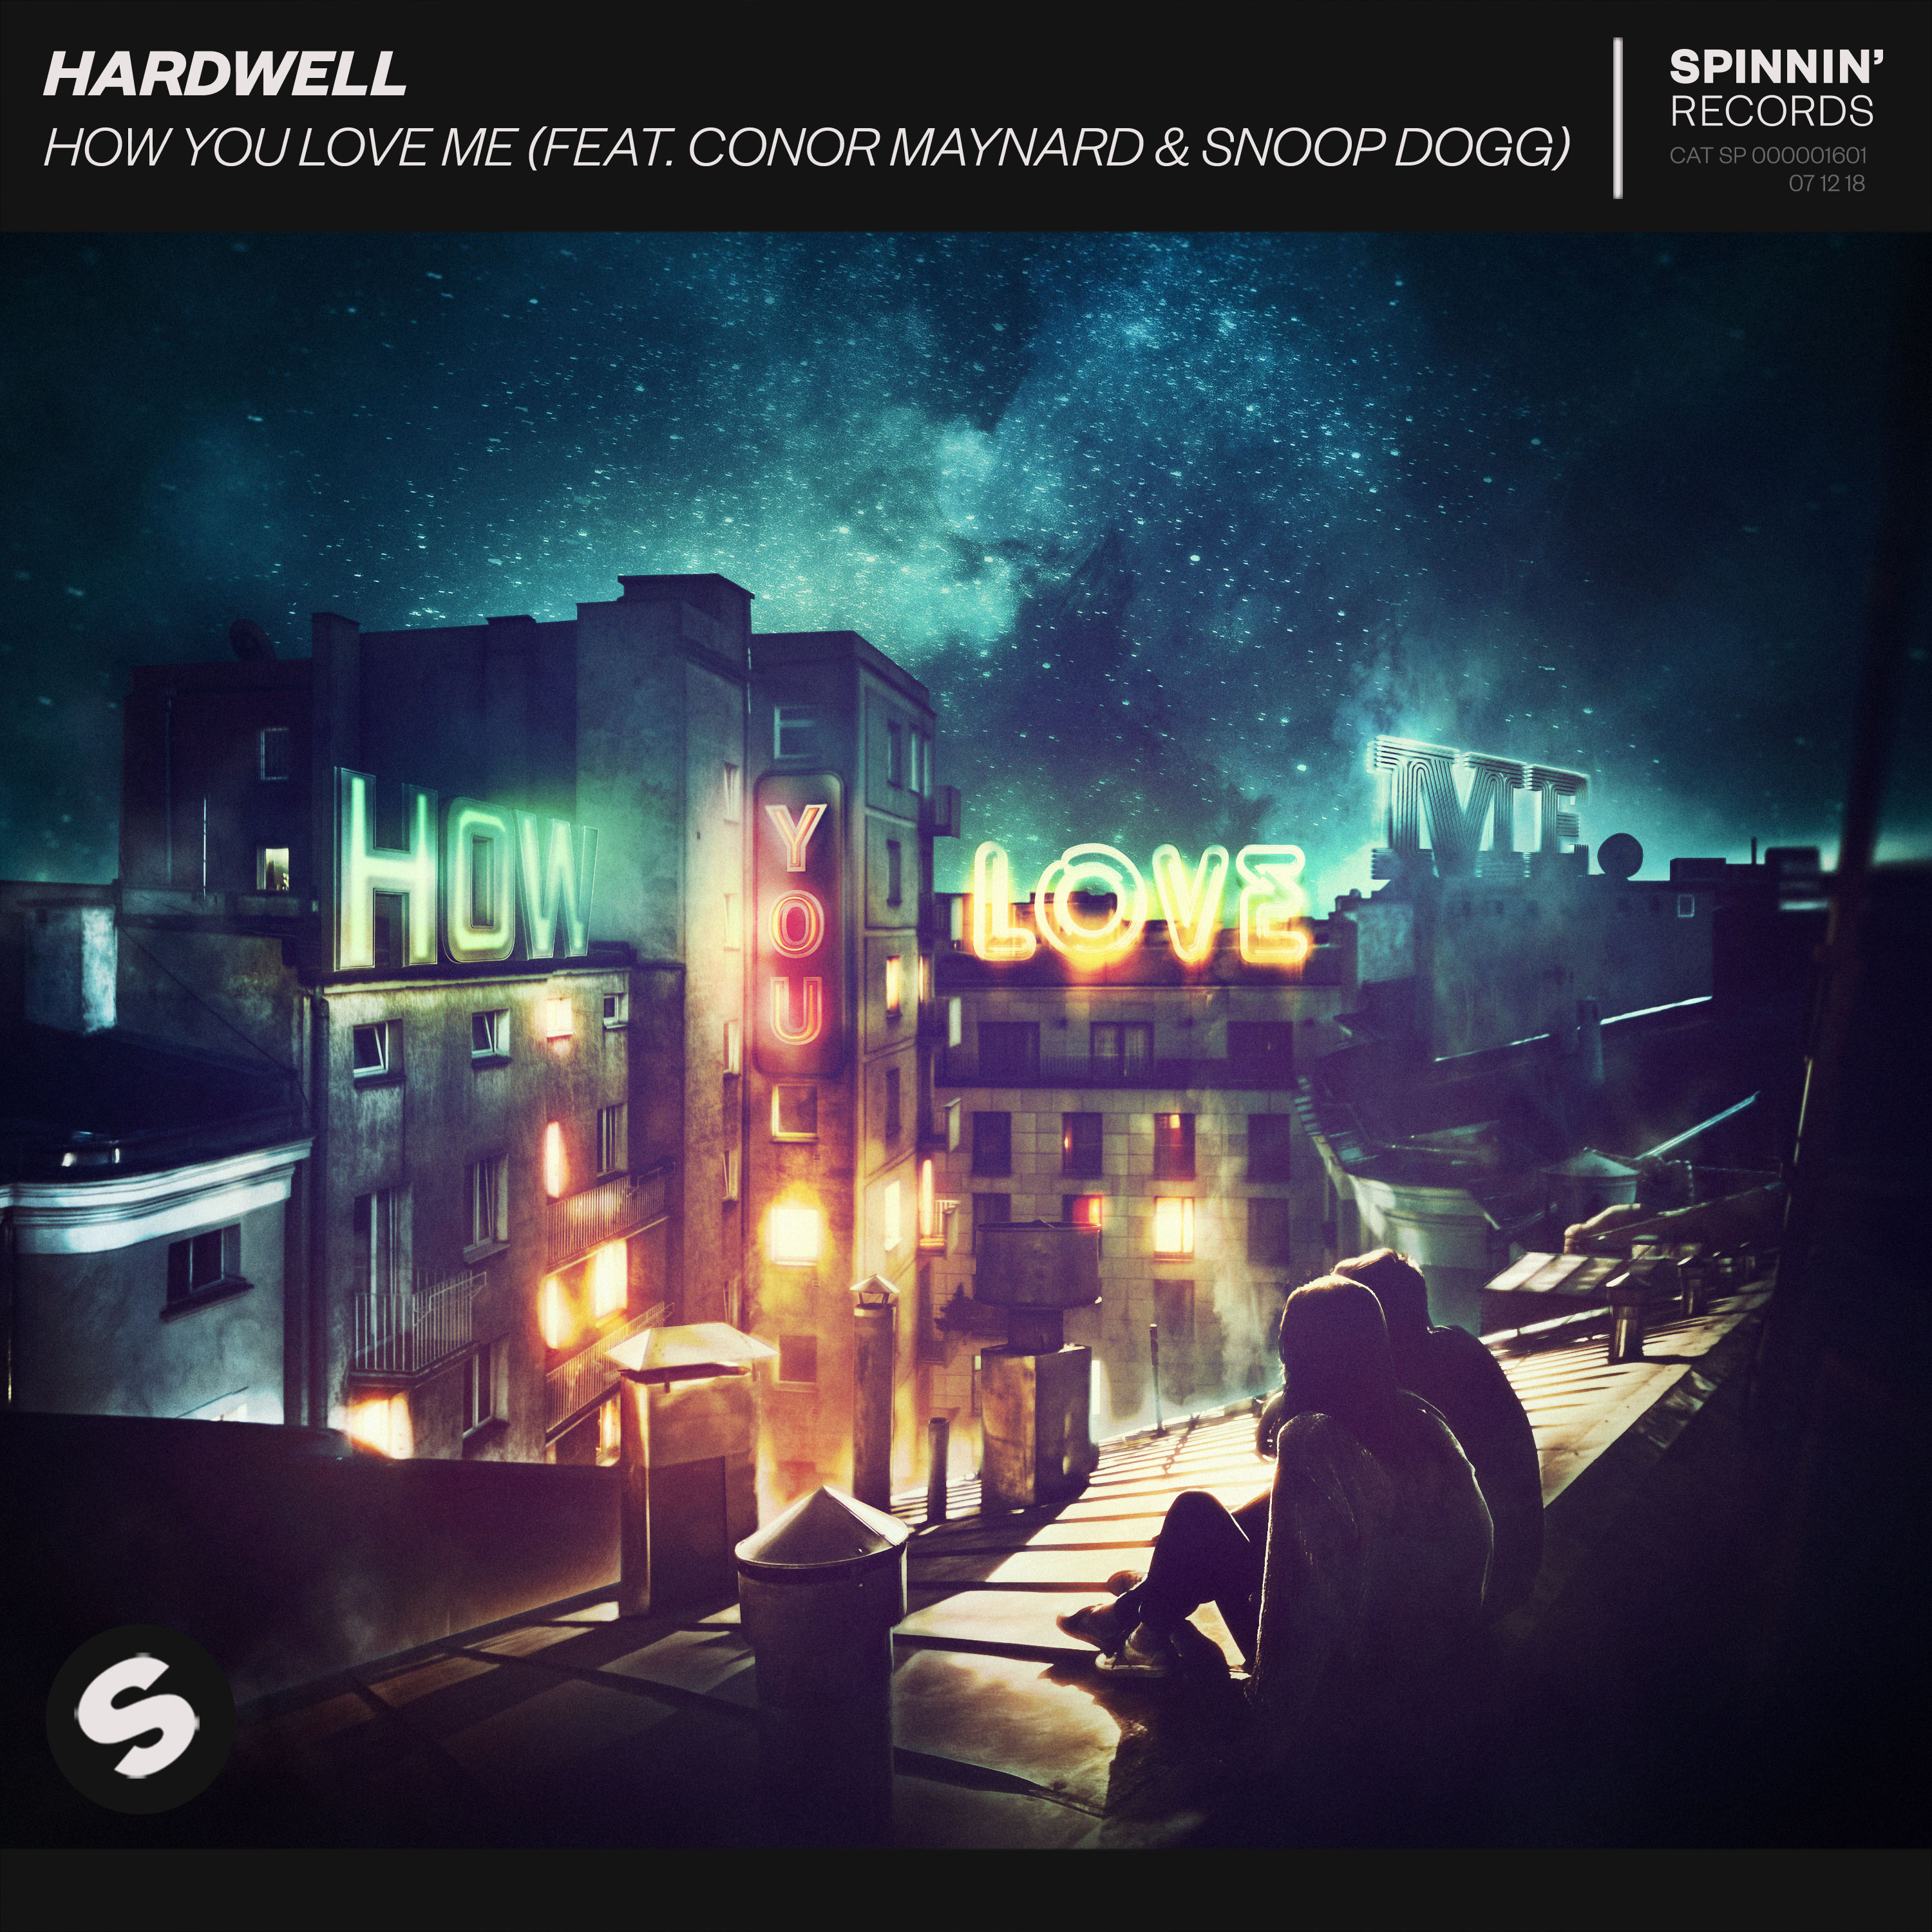 Hardwell featuring Conor Maynard & Snoop Dogg — How You Love Me cover artwork